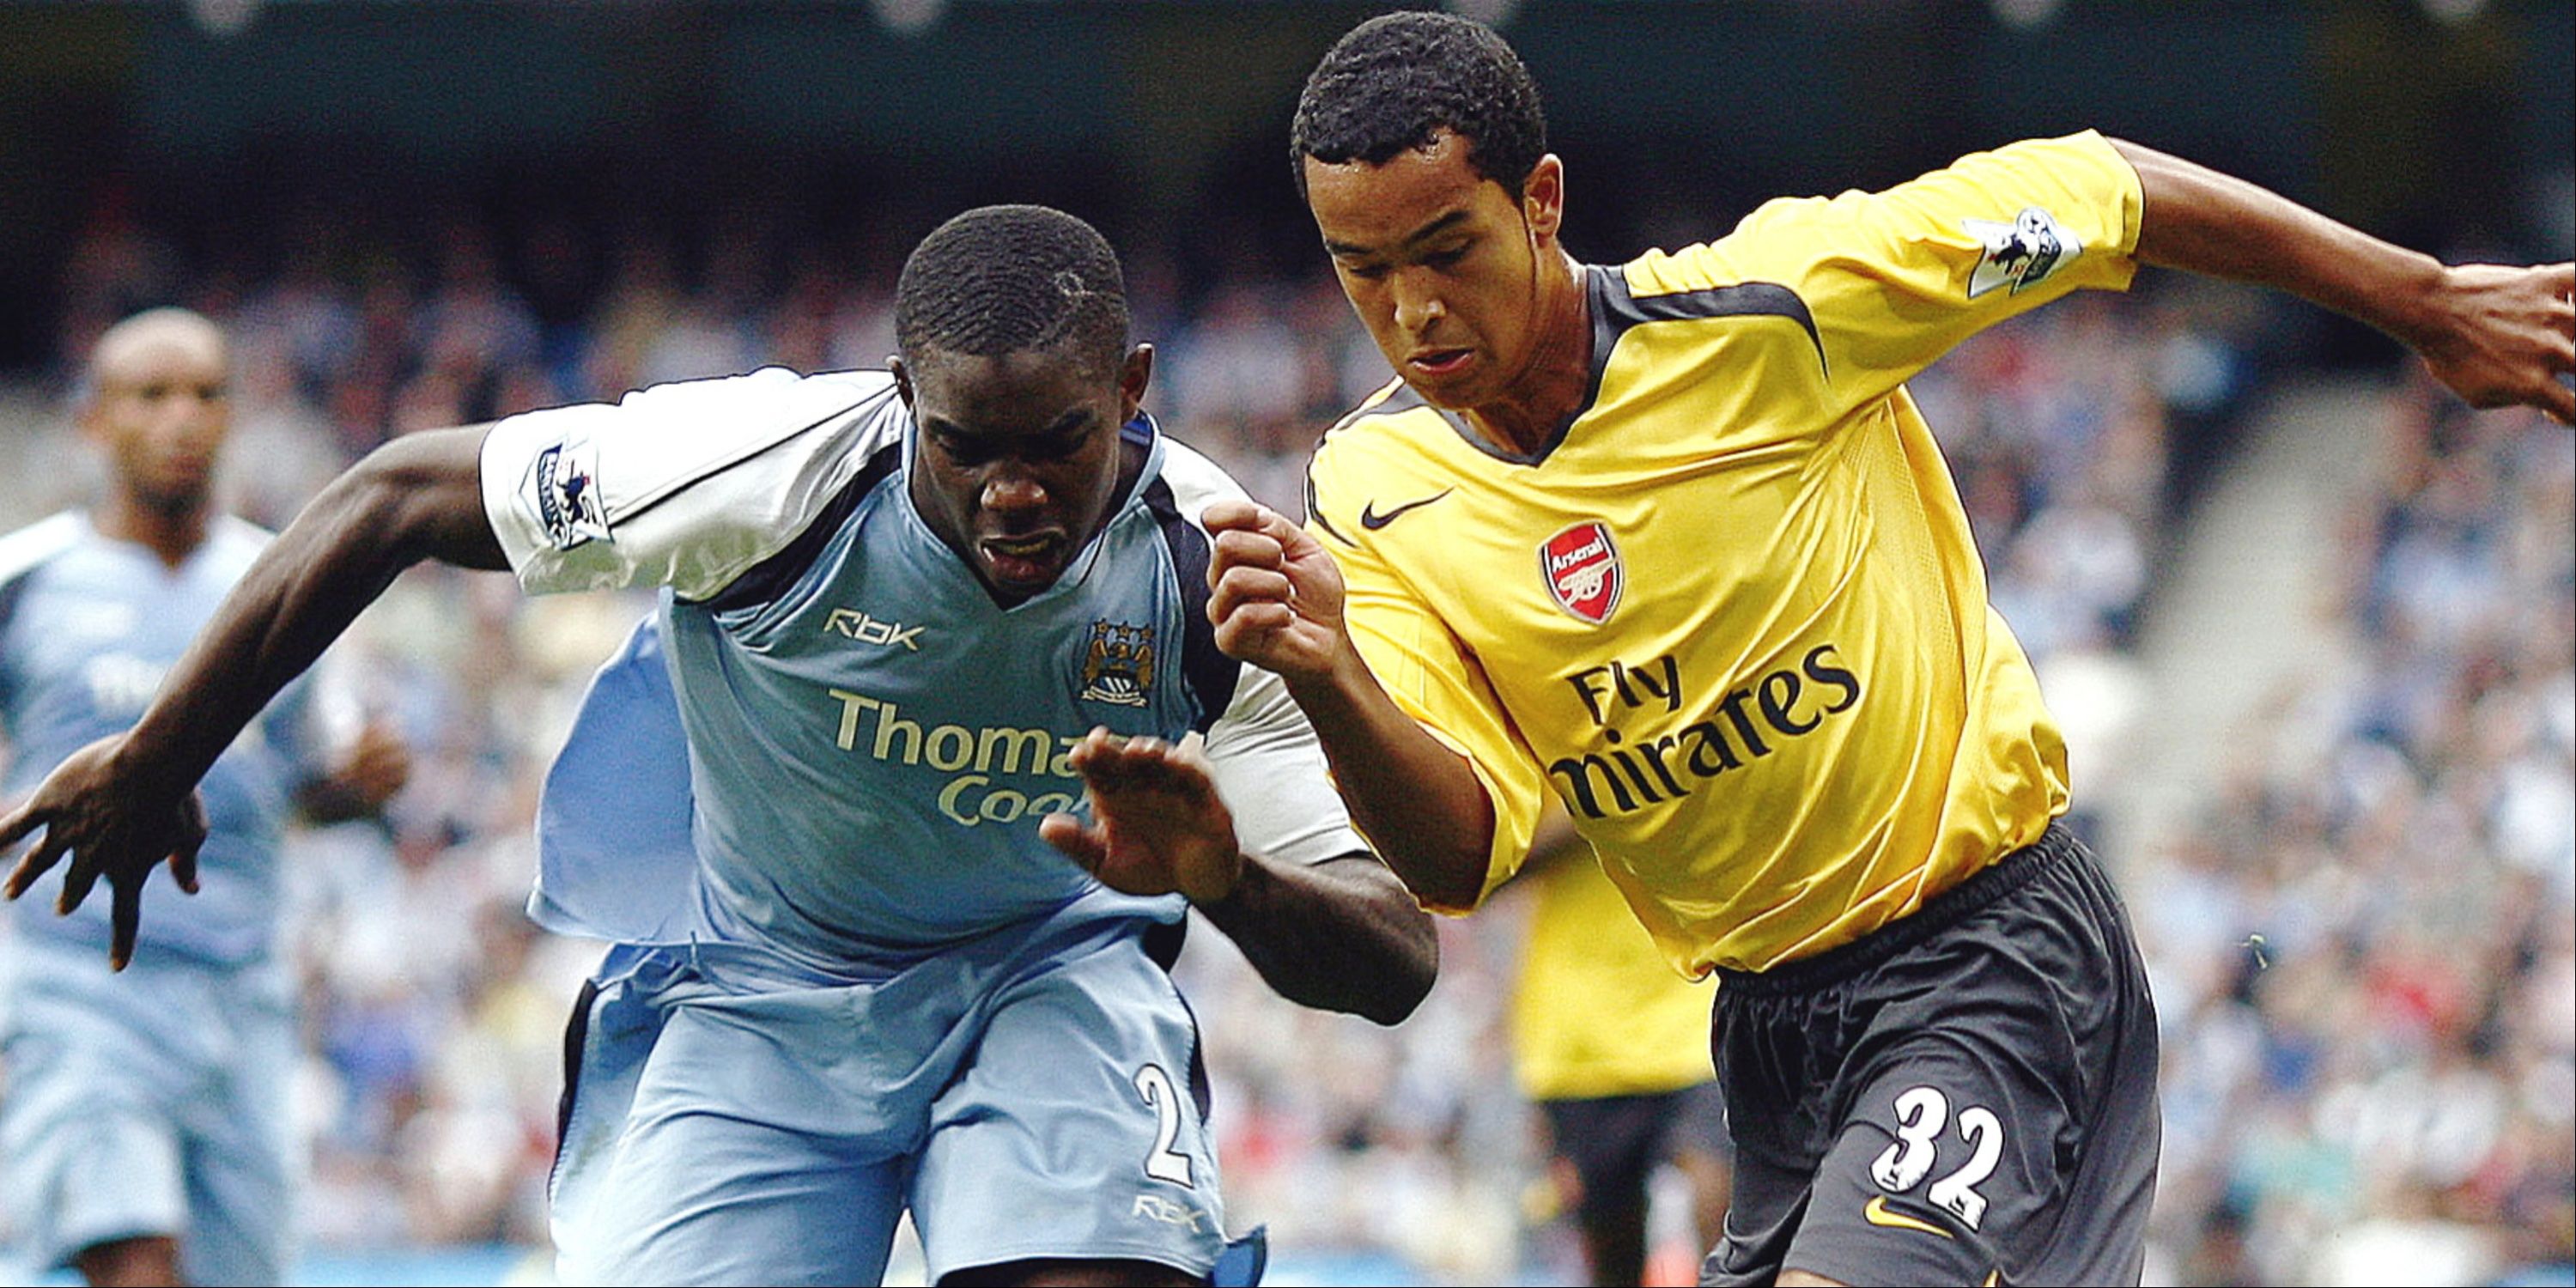 Manchester City's Micah Richards and Arsenal's Theo Walcott